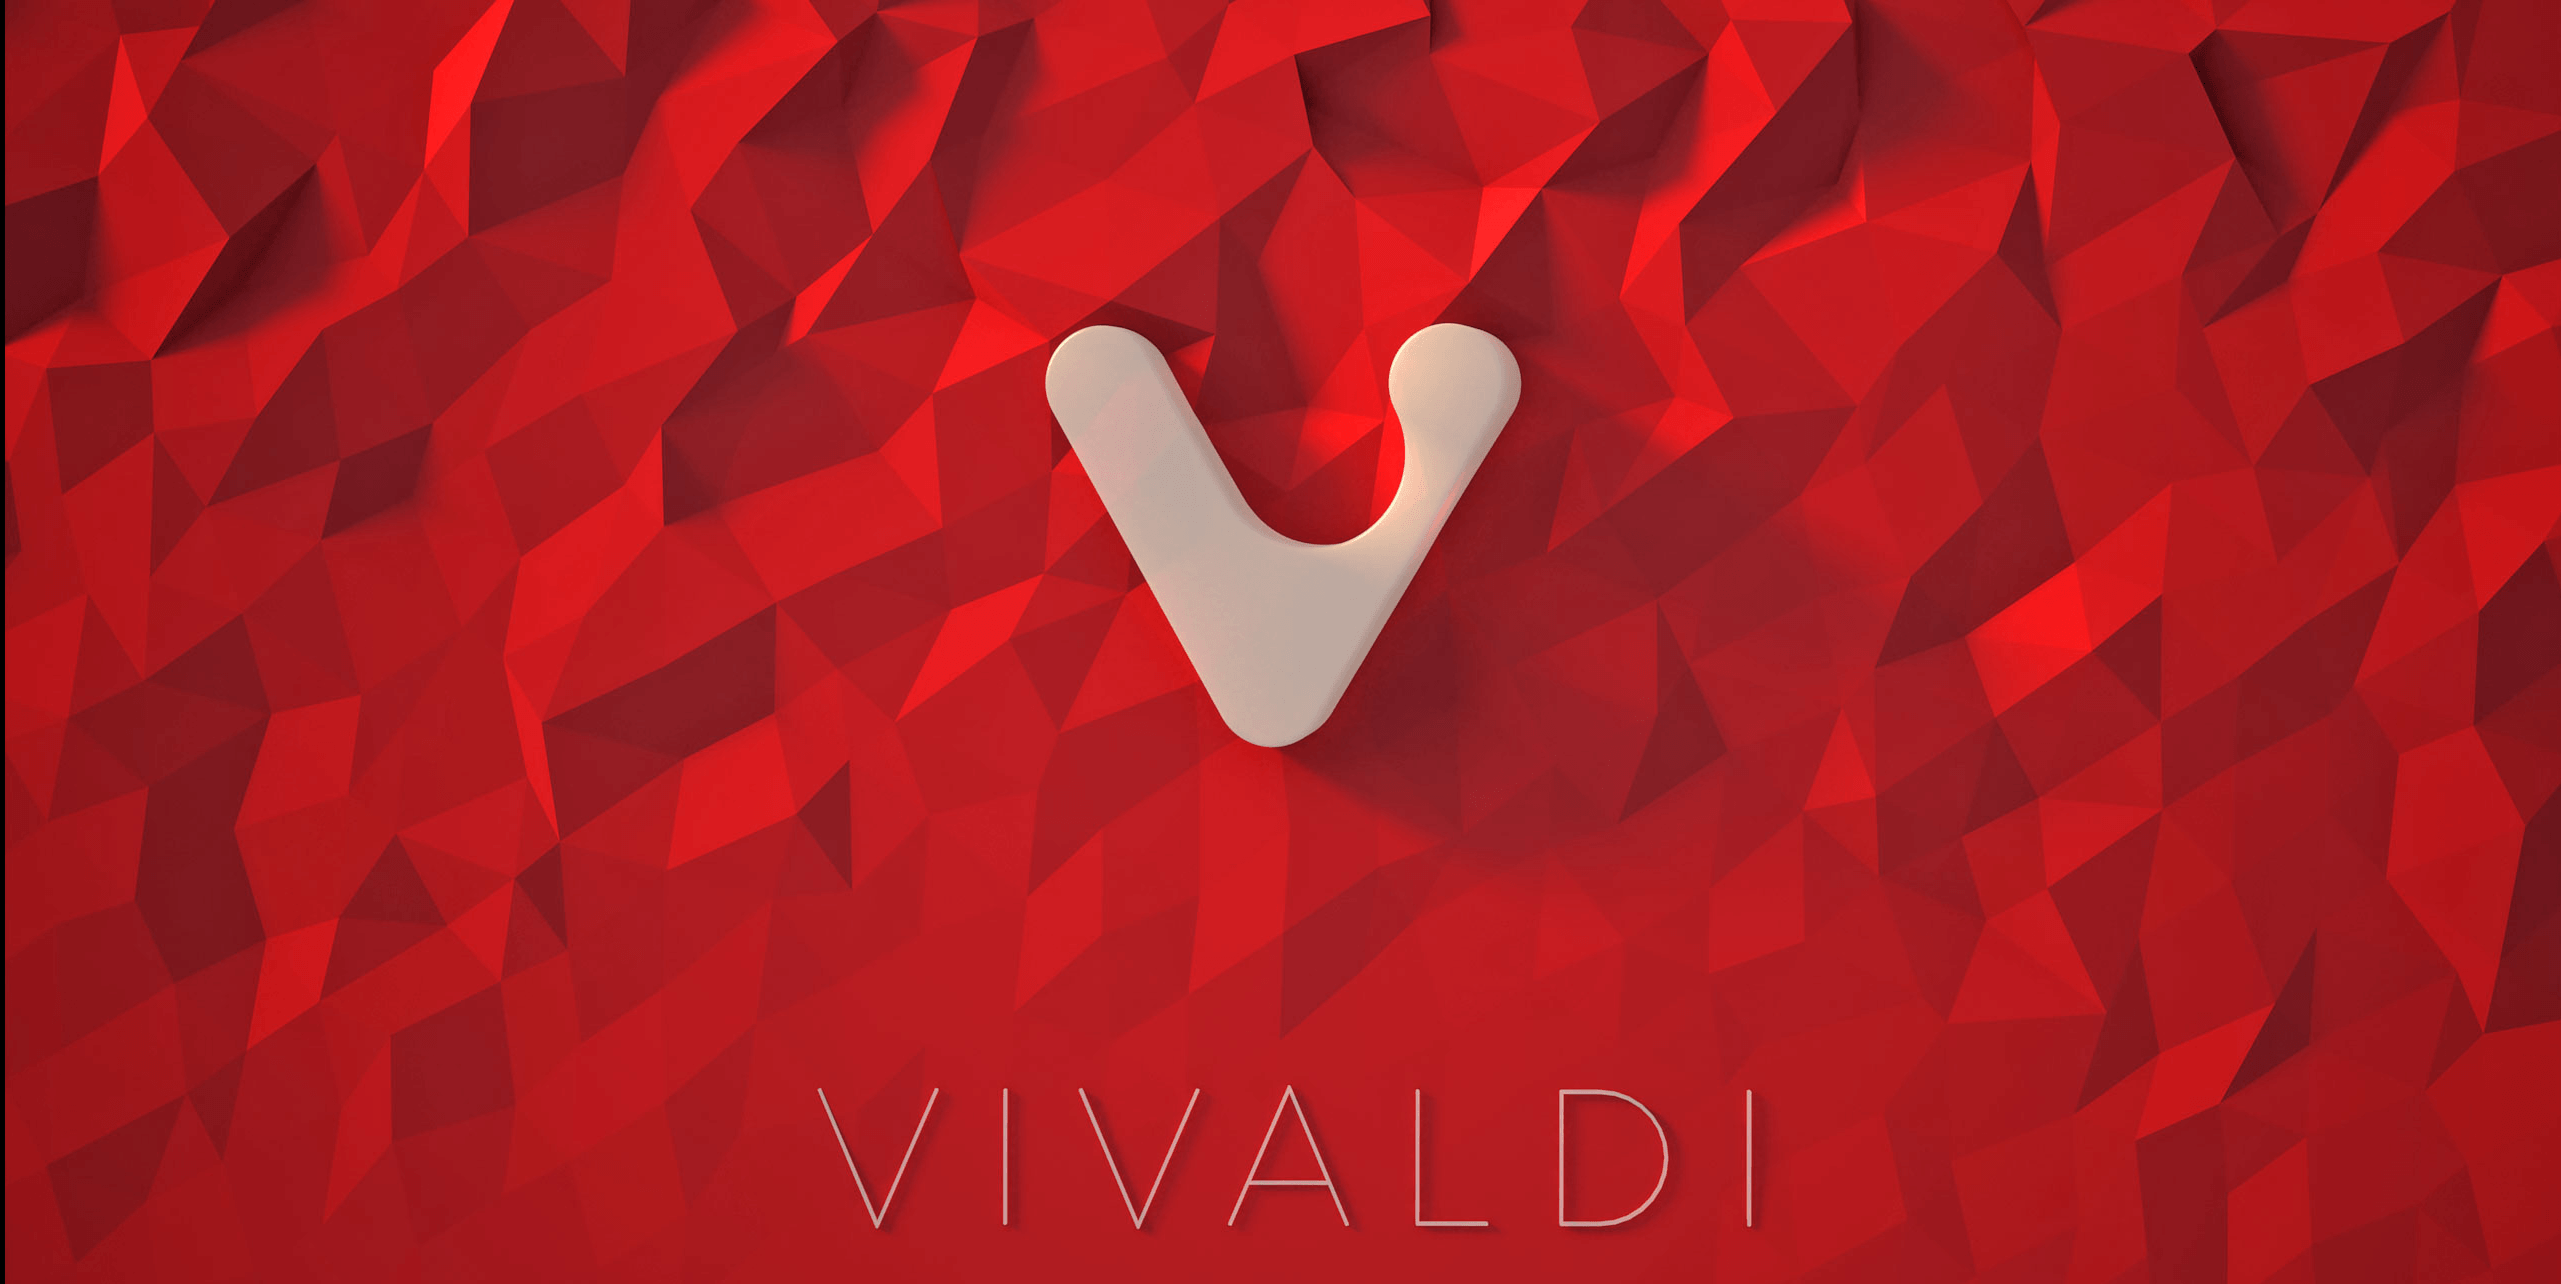 Vivaldi, Iconic Composer, Now an Iconic Browser?